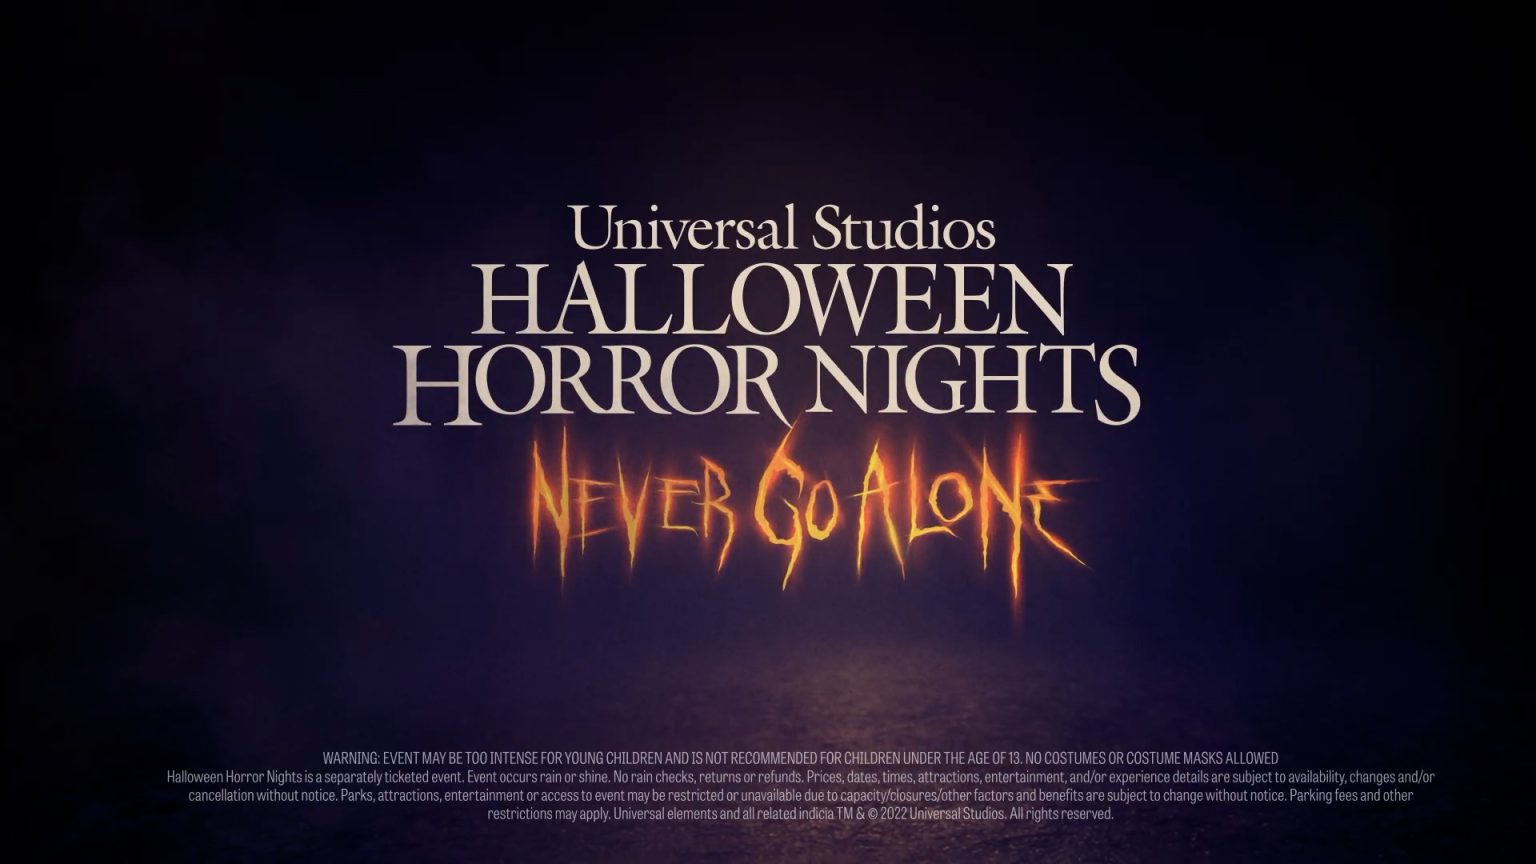 Universal Announces CHUCKY Haunted House for Halloween Horror Nights